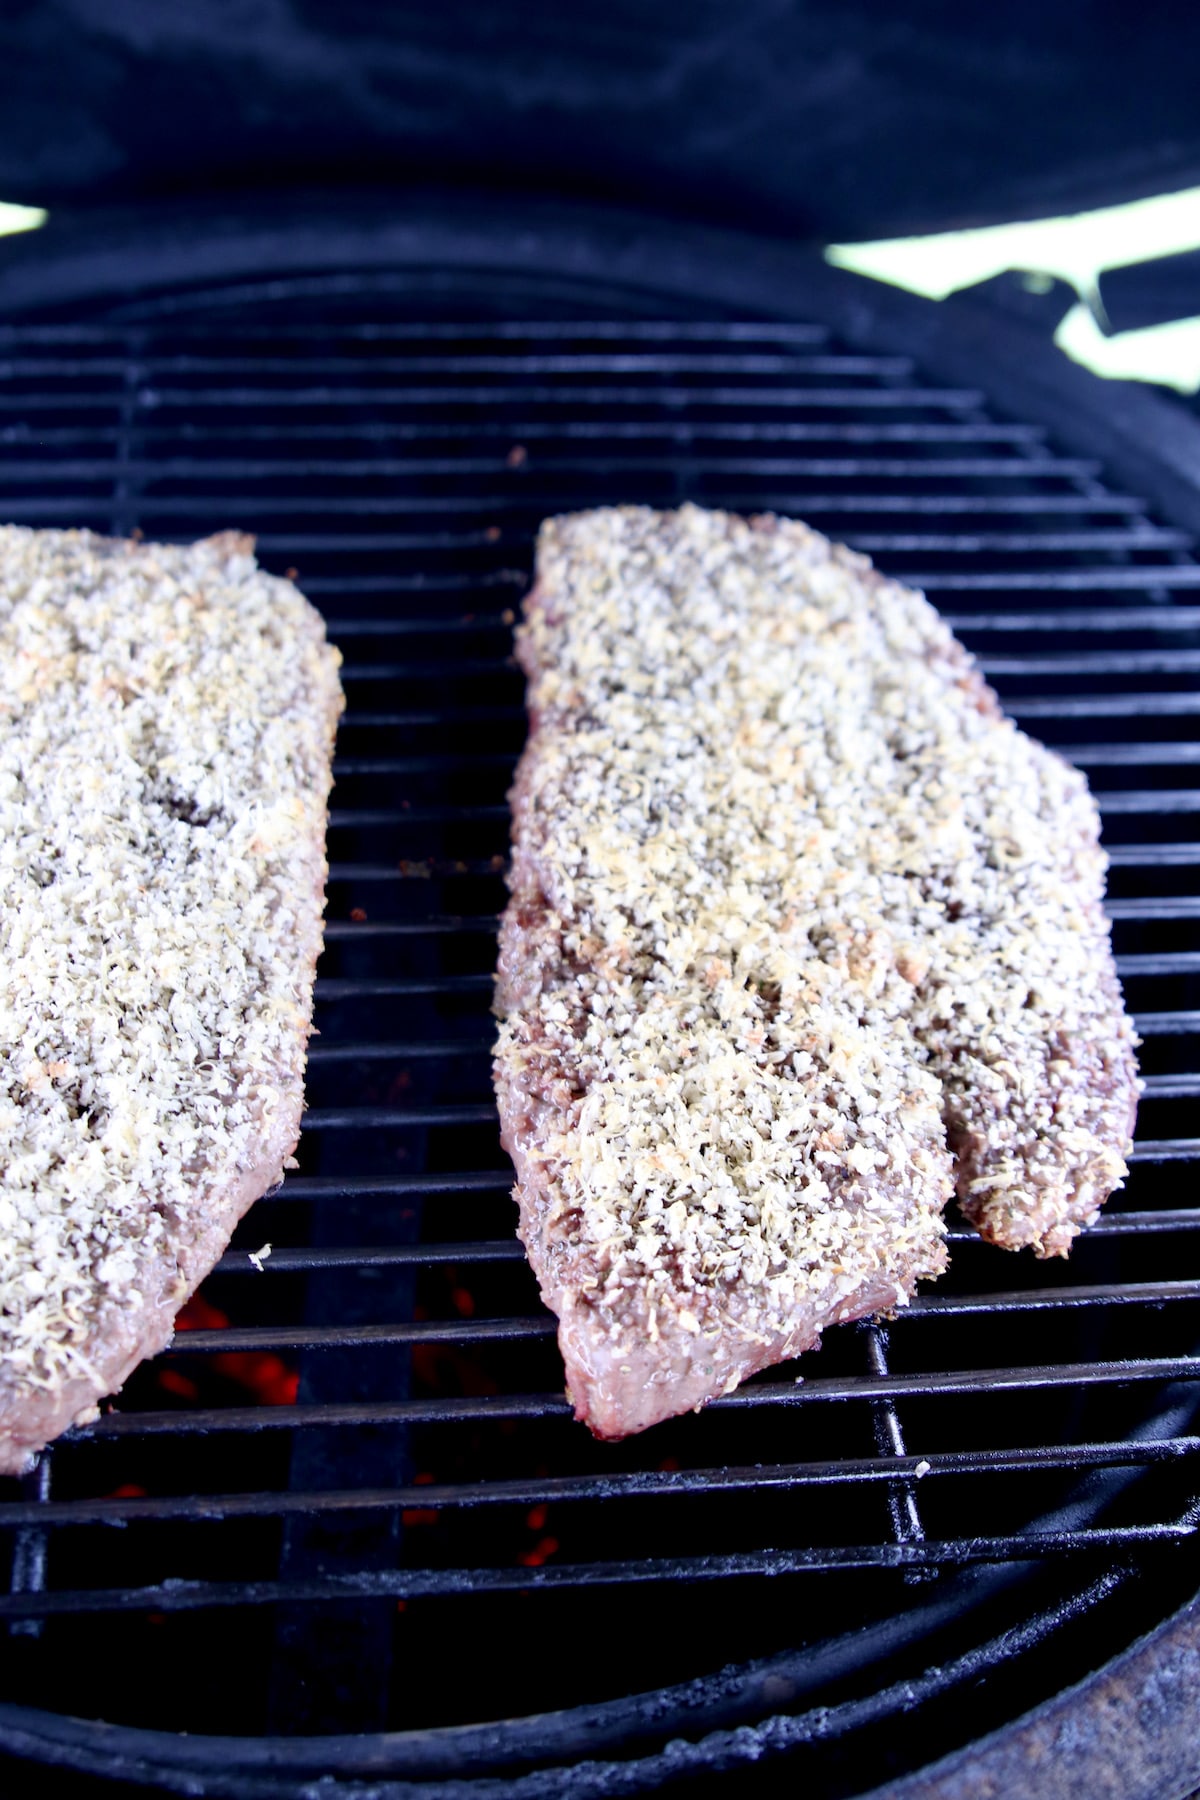 Parmesan crusted sirloins on grill.